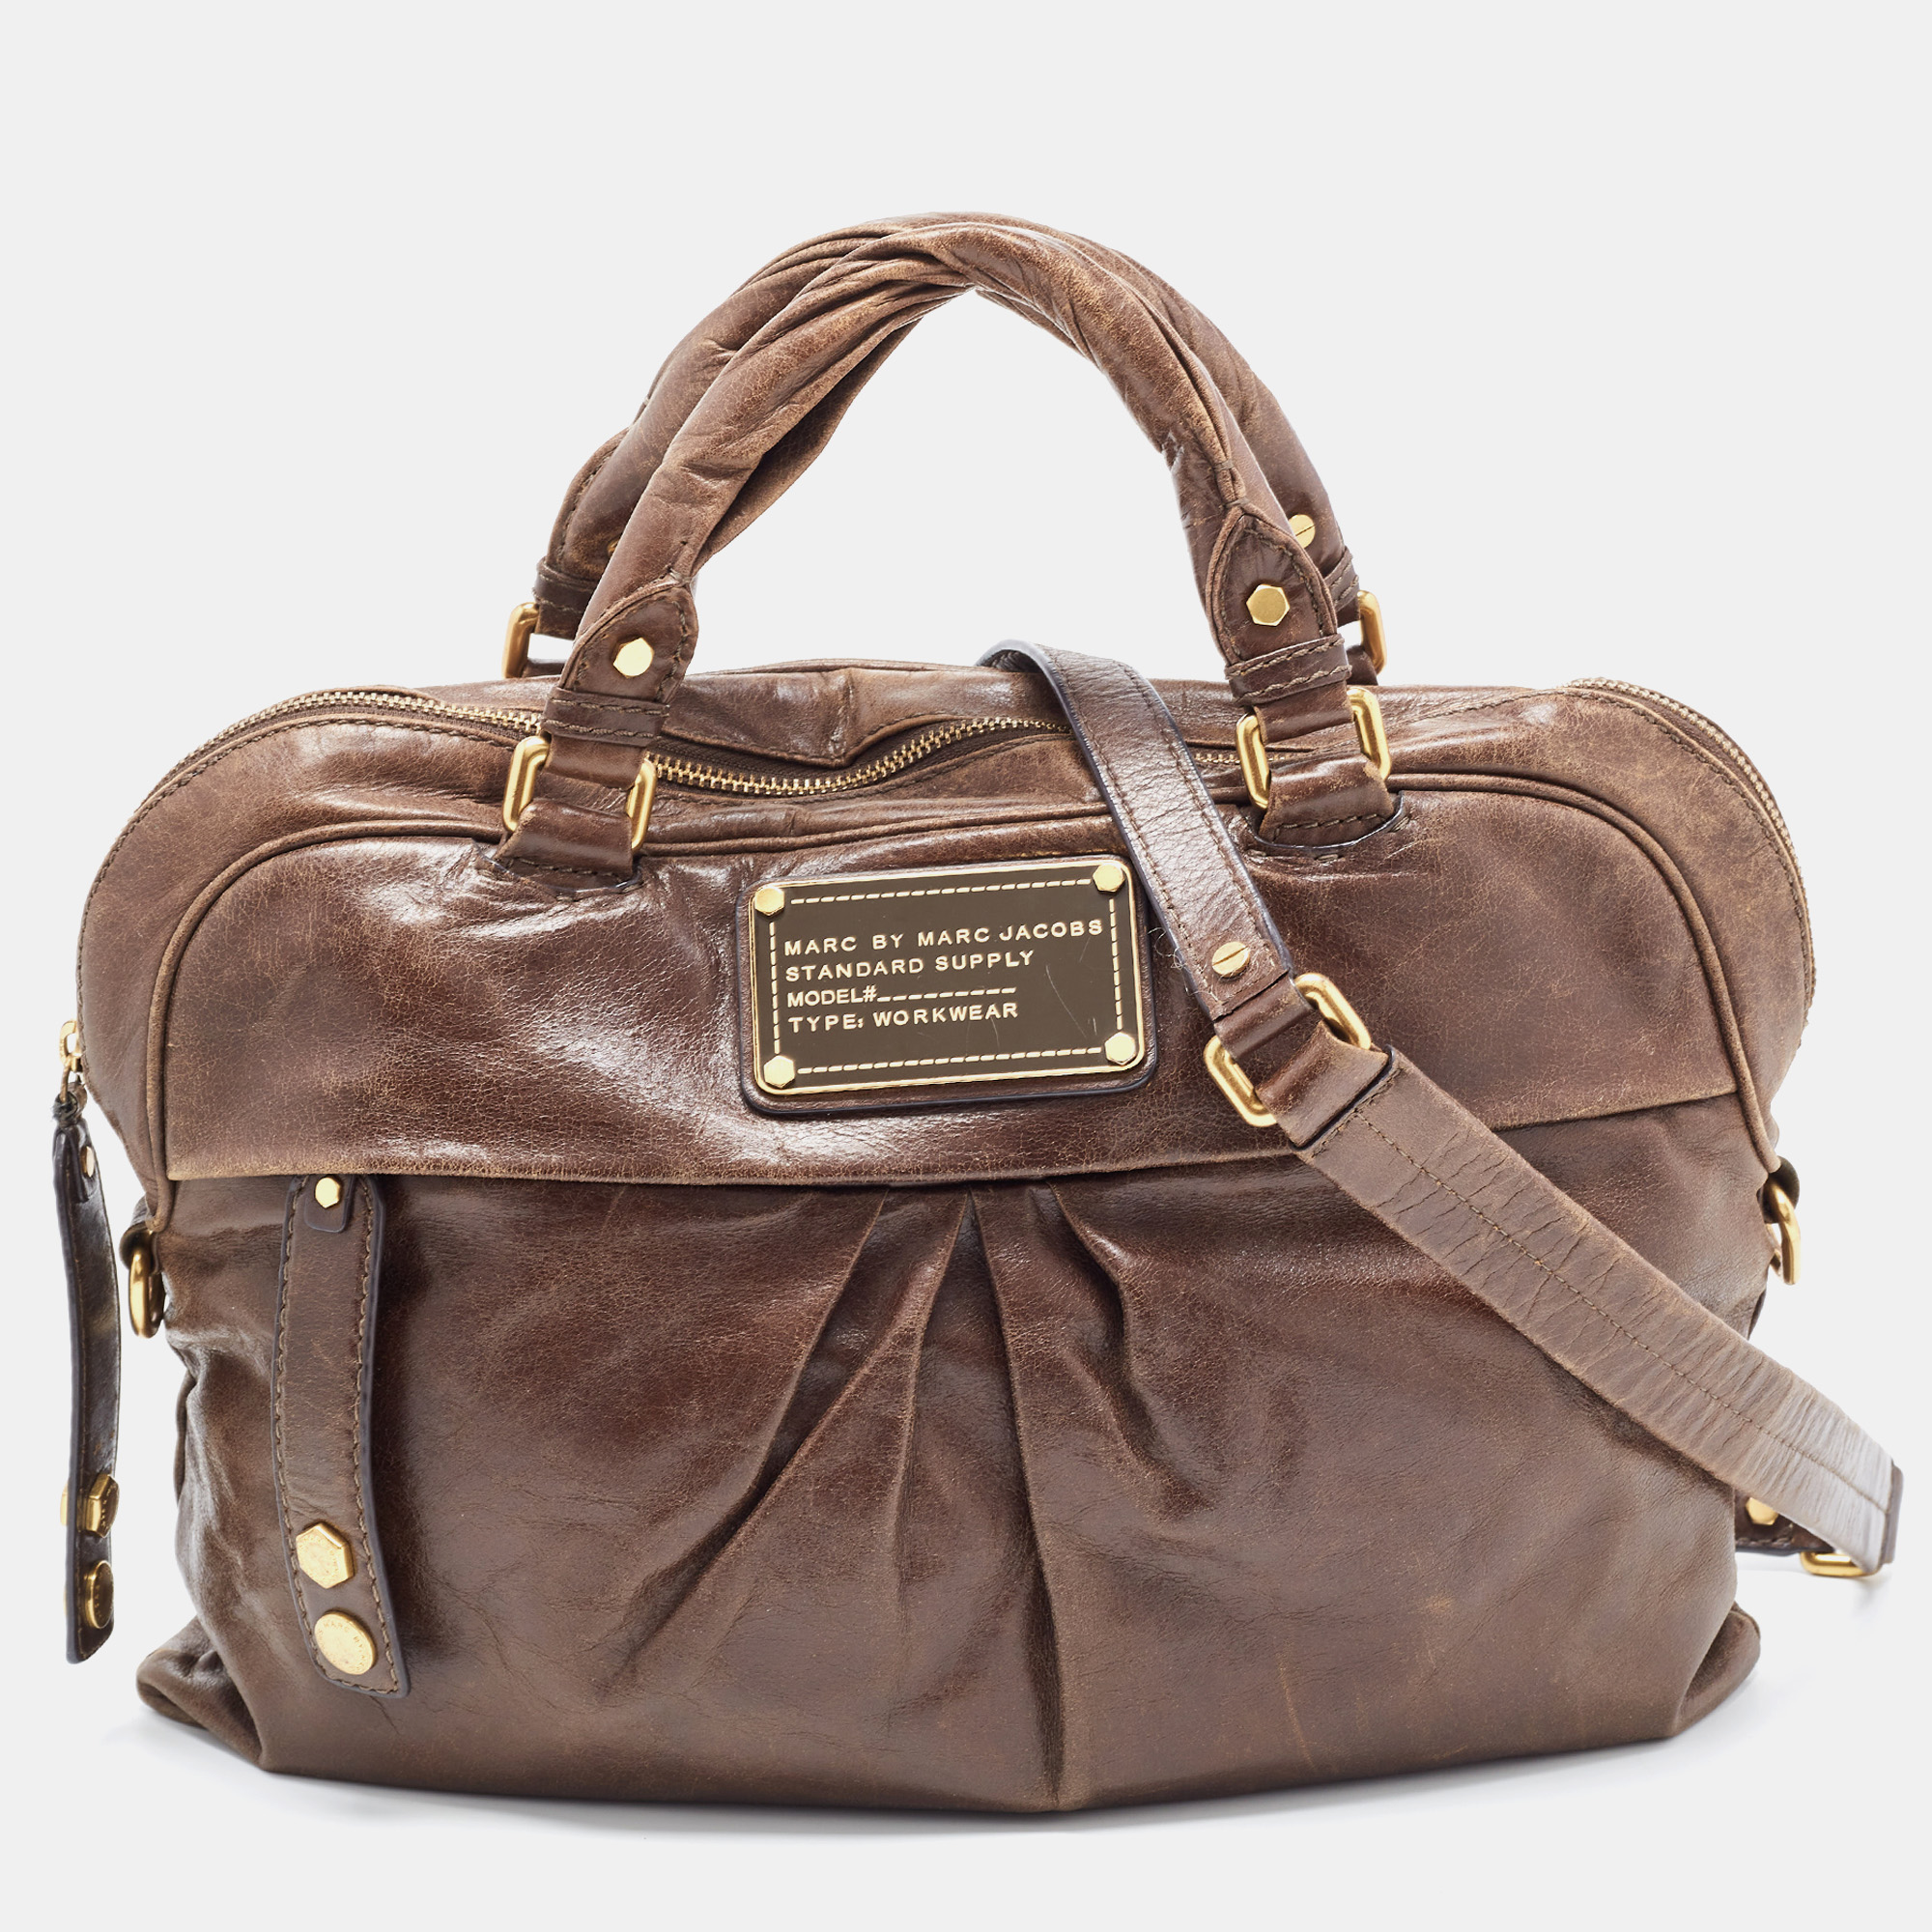 

Marc by Marc Jacobs Brown Leather Classic Q Baby Groovee Satchel